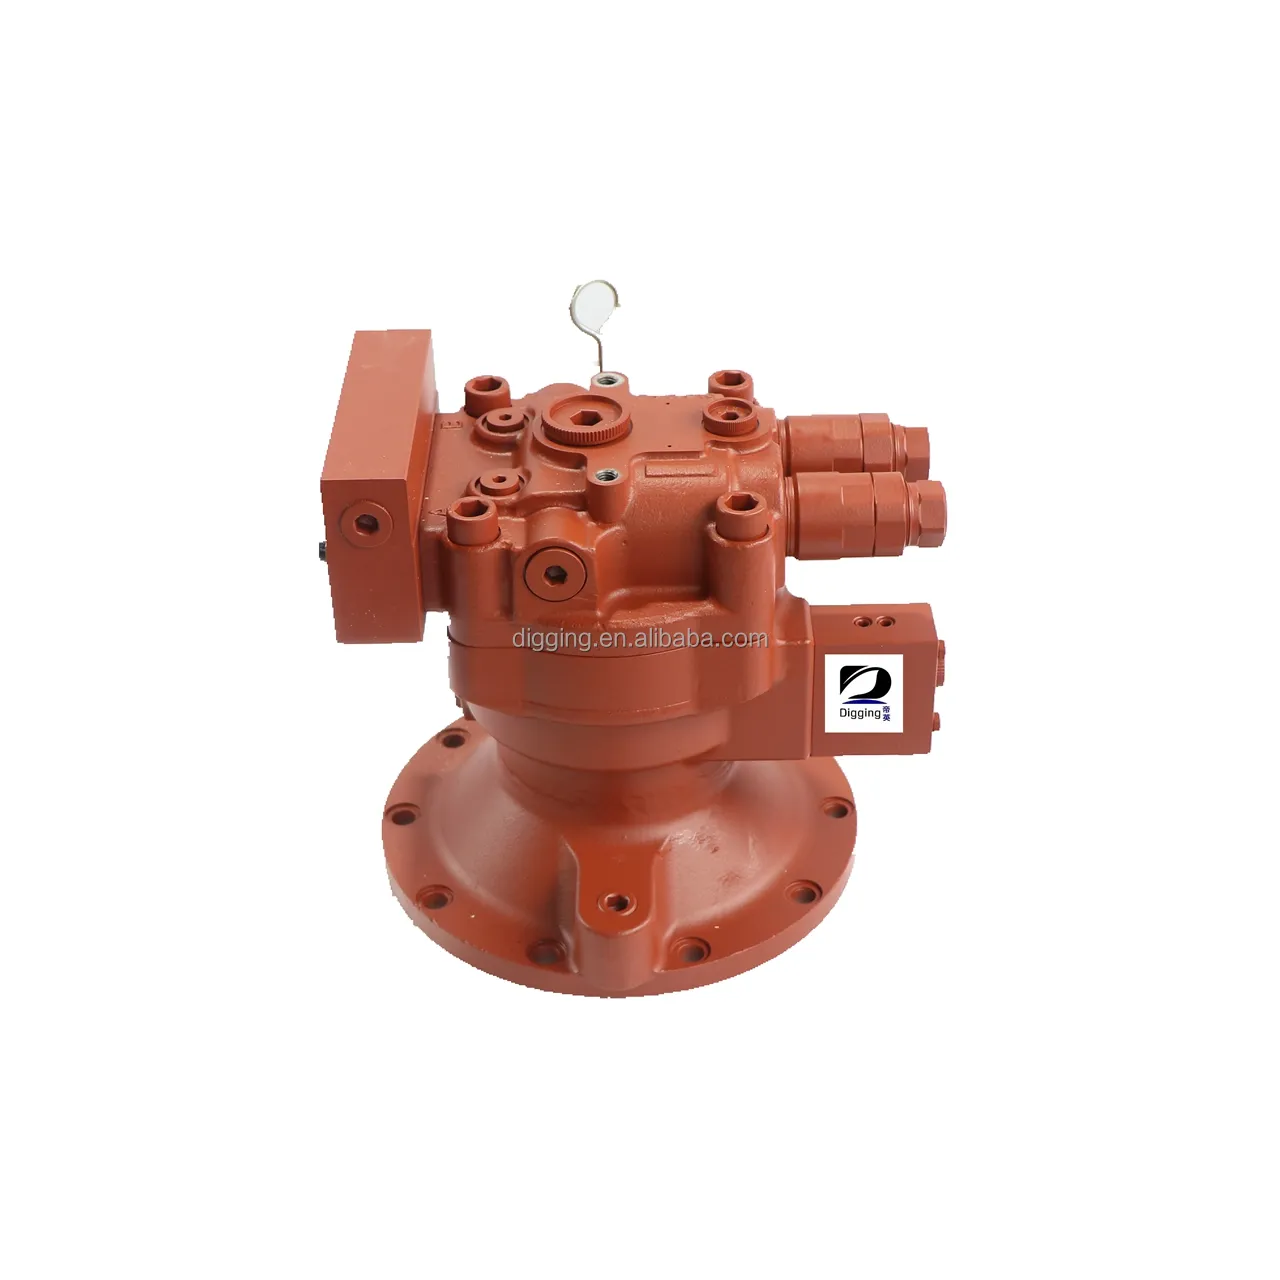 jining digging hot sale Construction Machinery Parts Sany 135 Hydraulic Slewing Motor M2X63-14T Slewing Device Parts